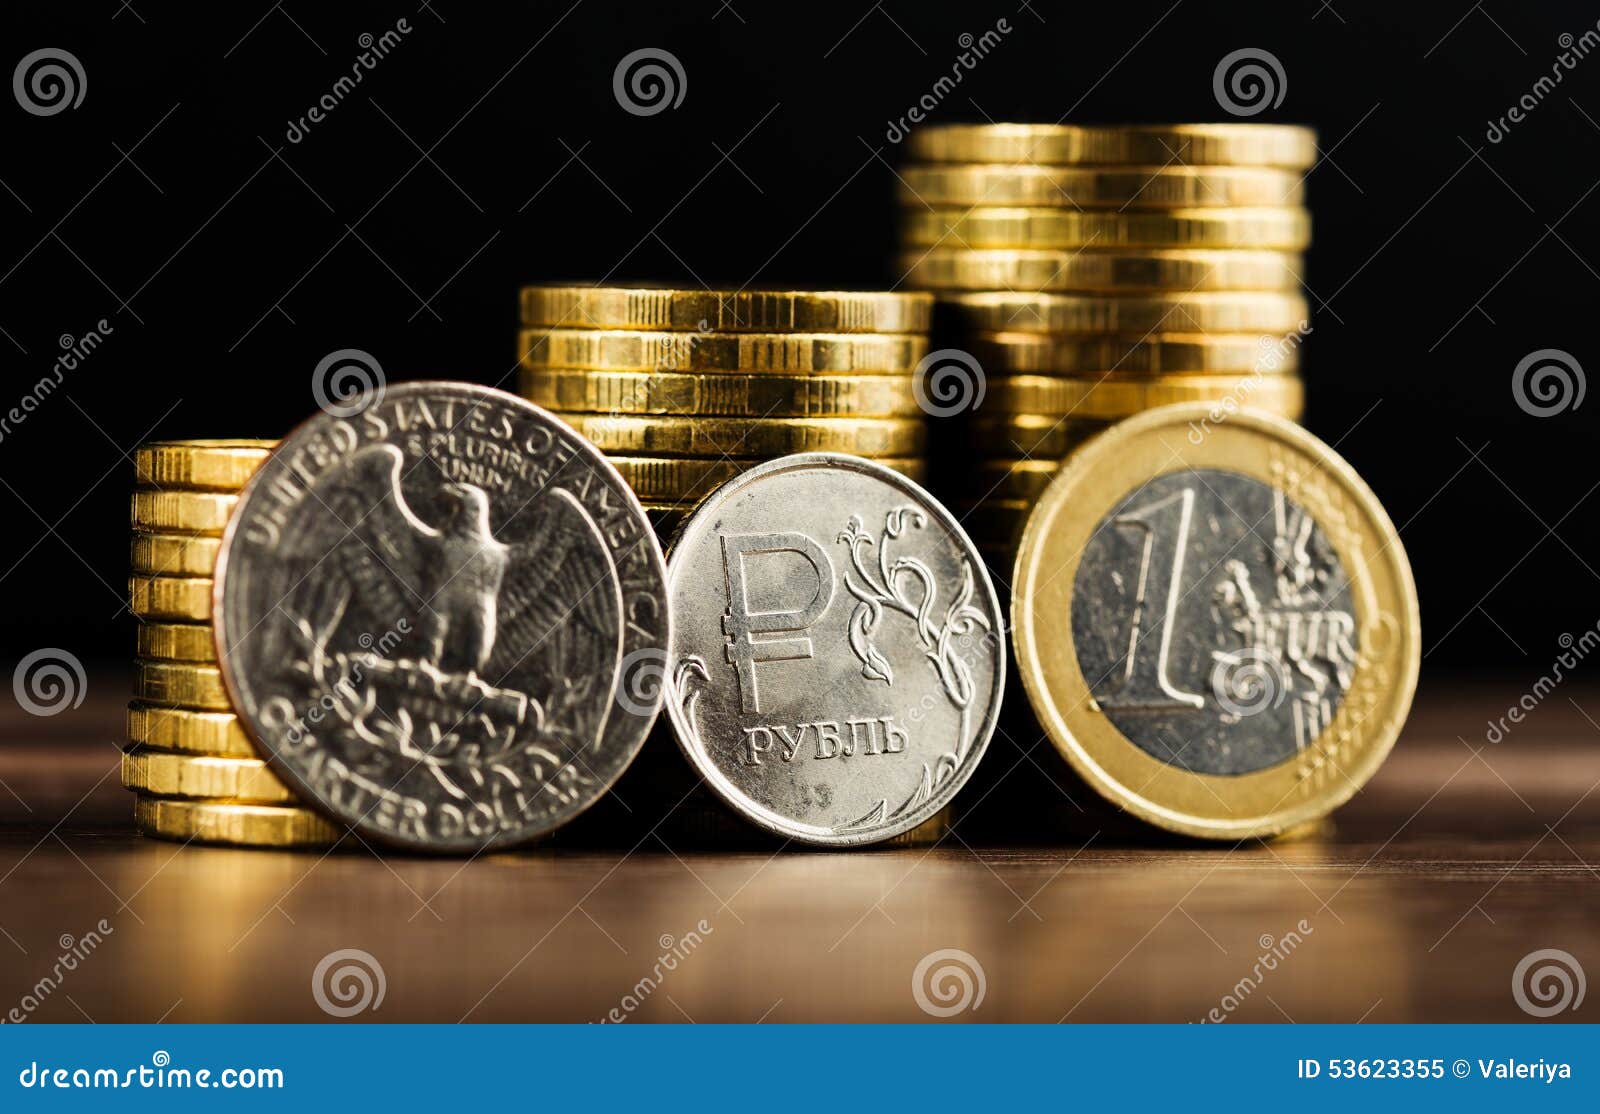 russian rouble coin between dollar and euro